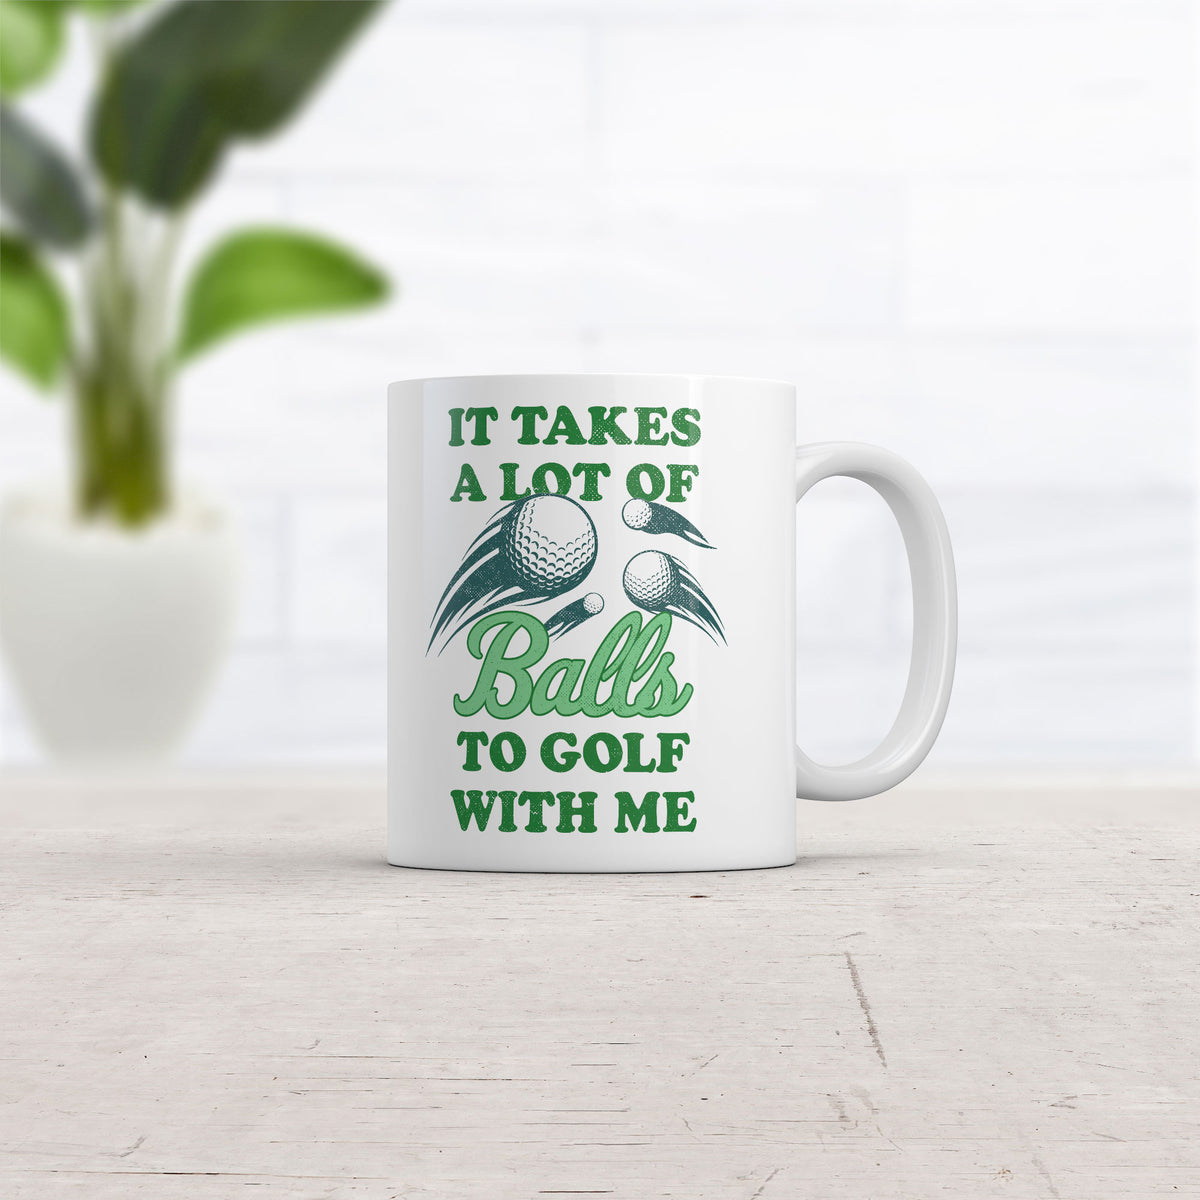 It Takes A Lot Of Balls To Golf With Me Mug